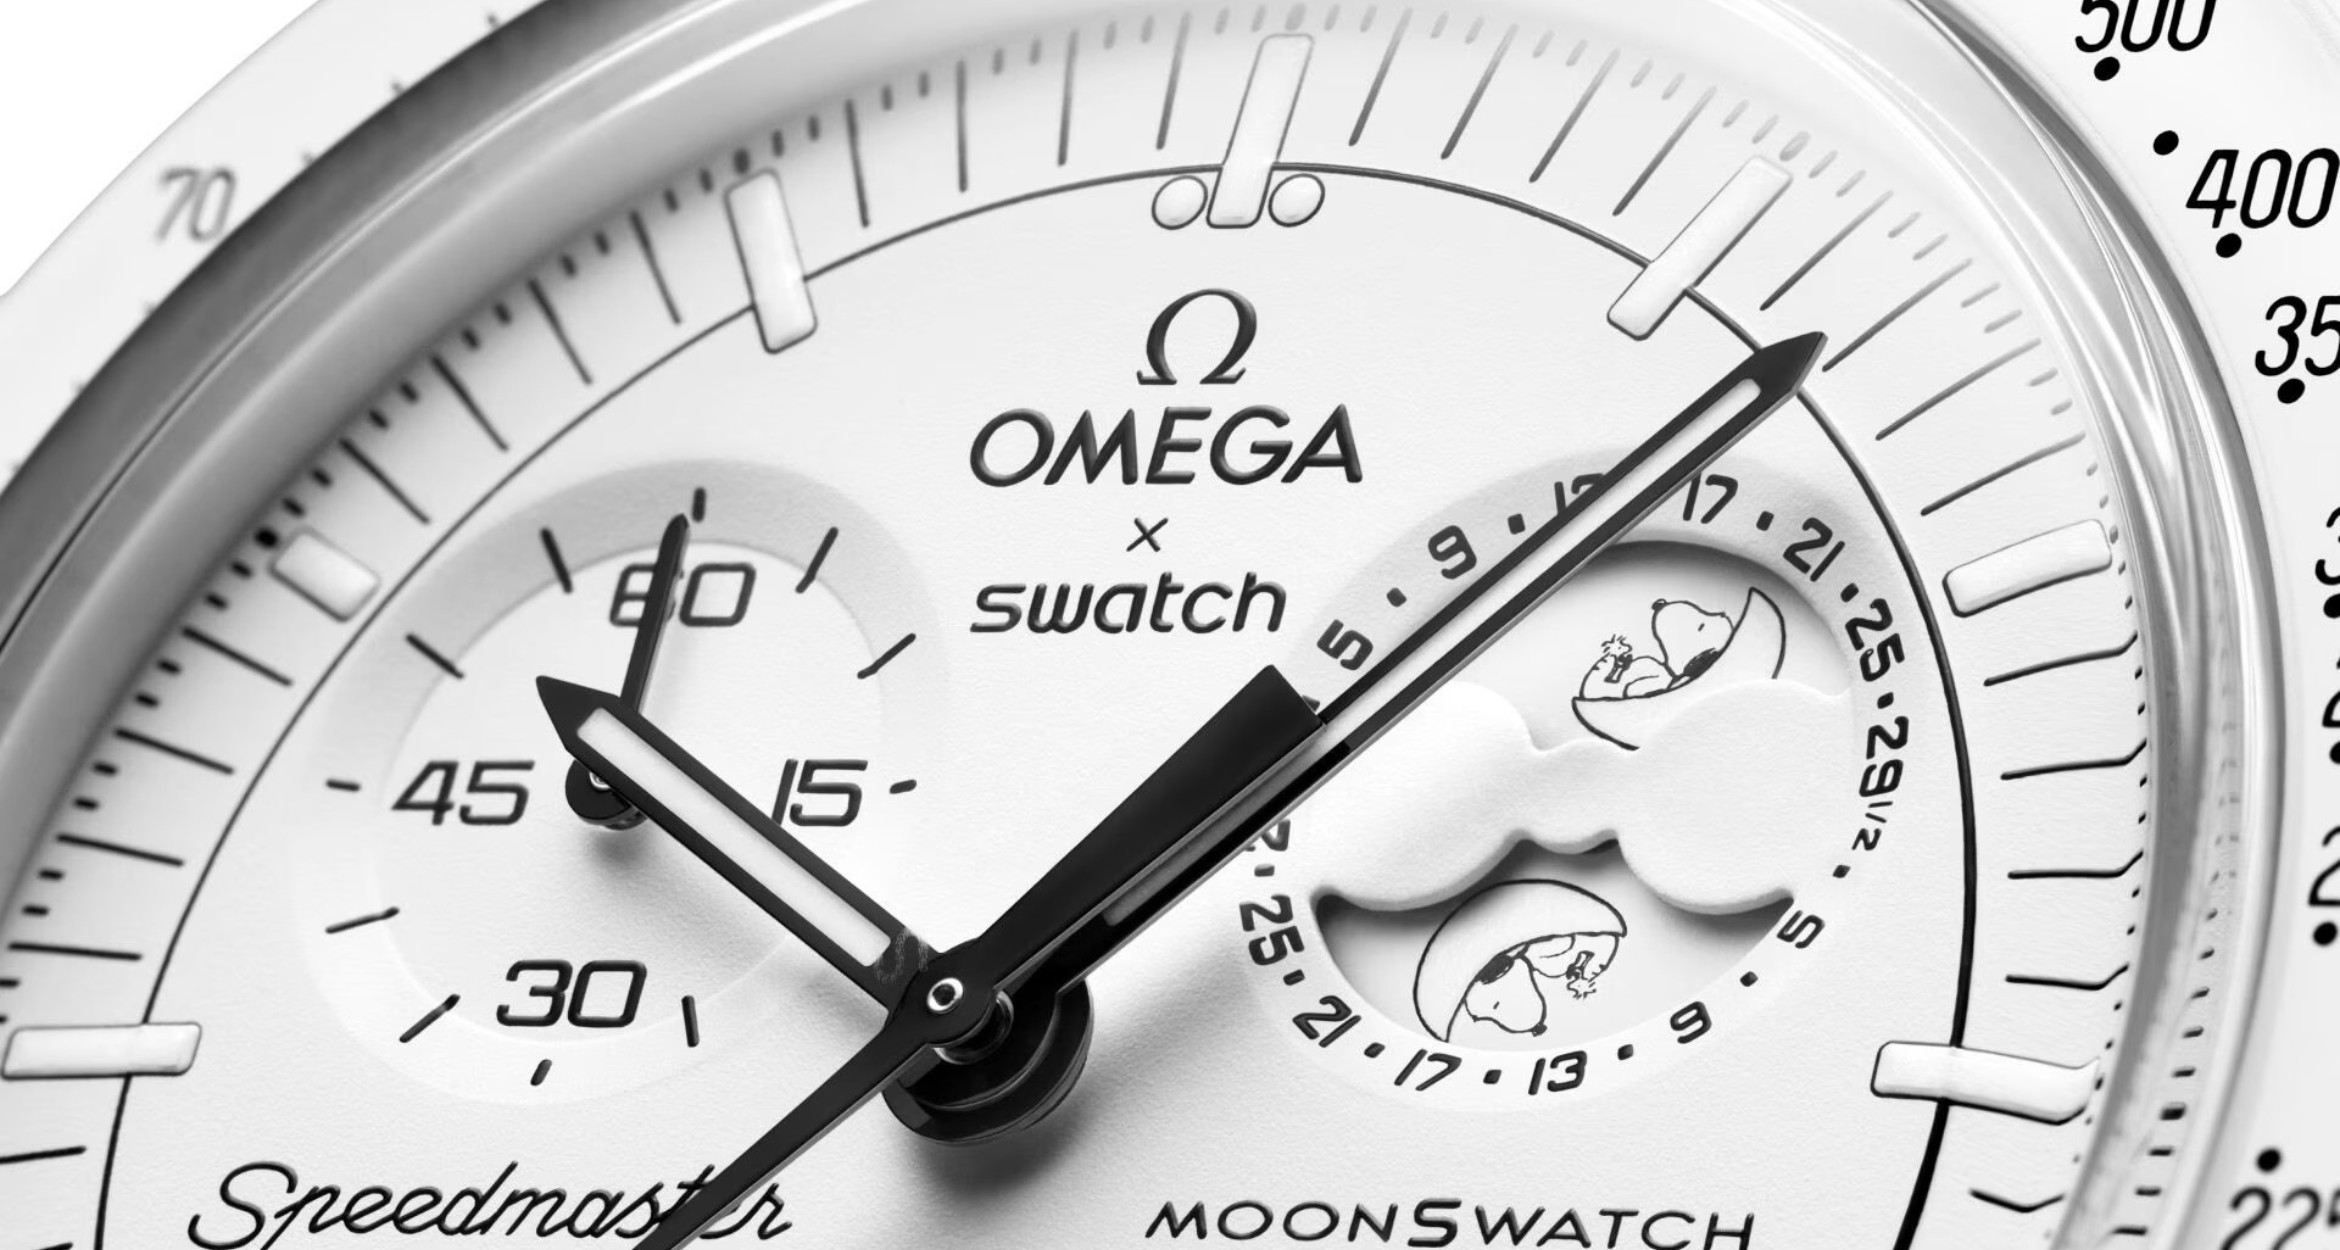 Snoopy Joins Omega x Swatch for latest Moonswatch Release